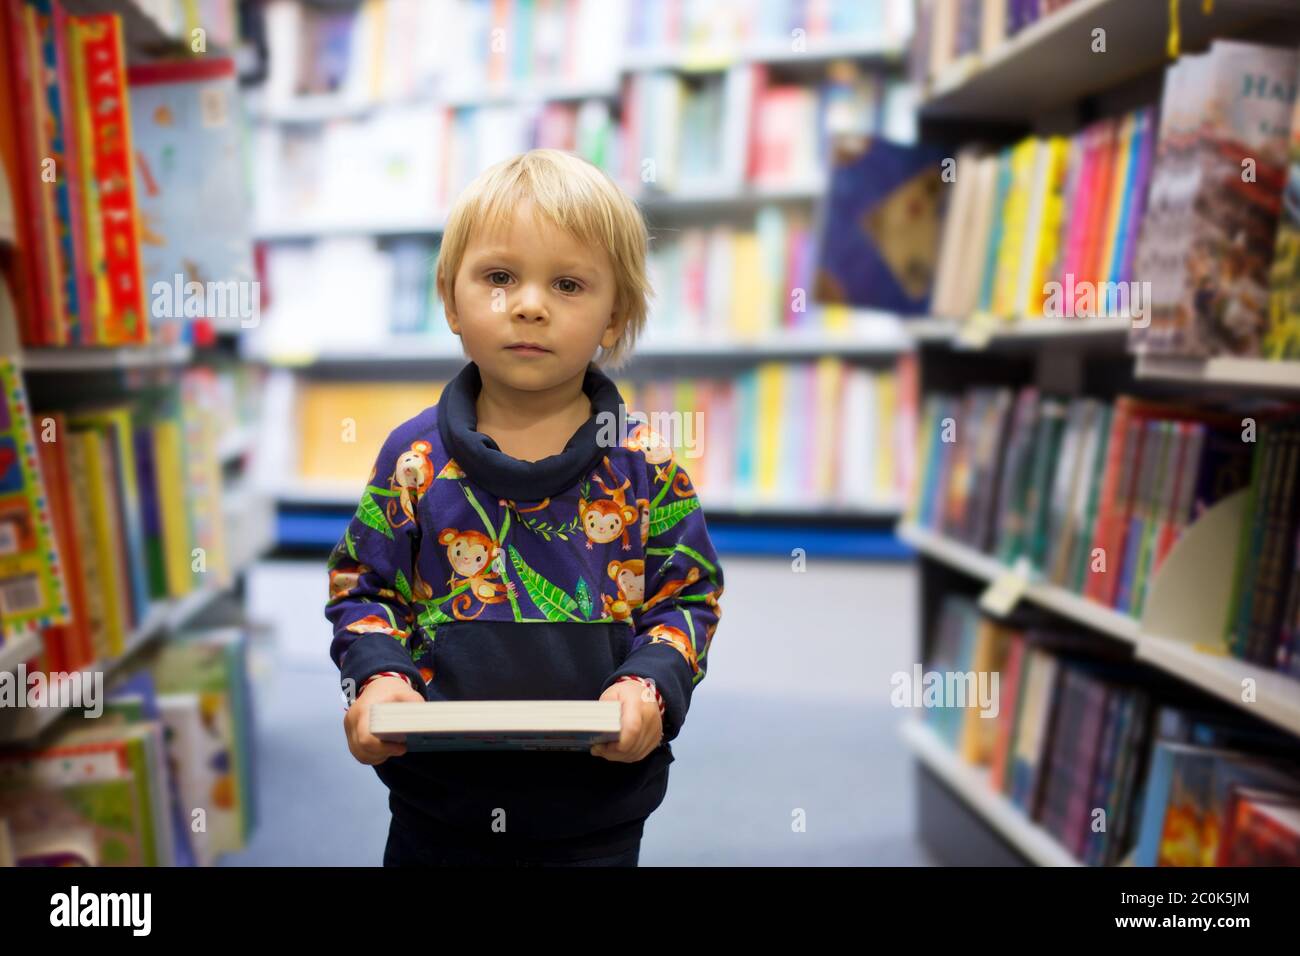 Adorable little boy, sitting in a book store and read book Stock Photo